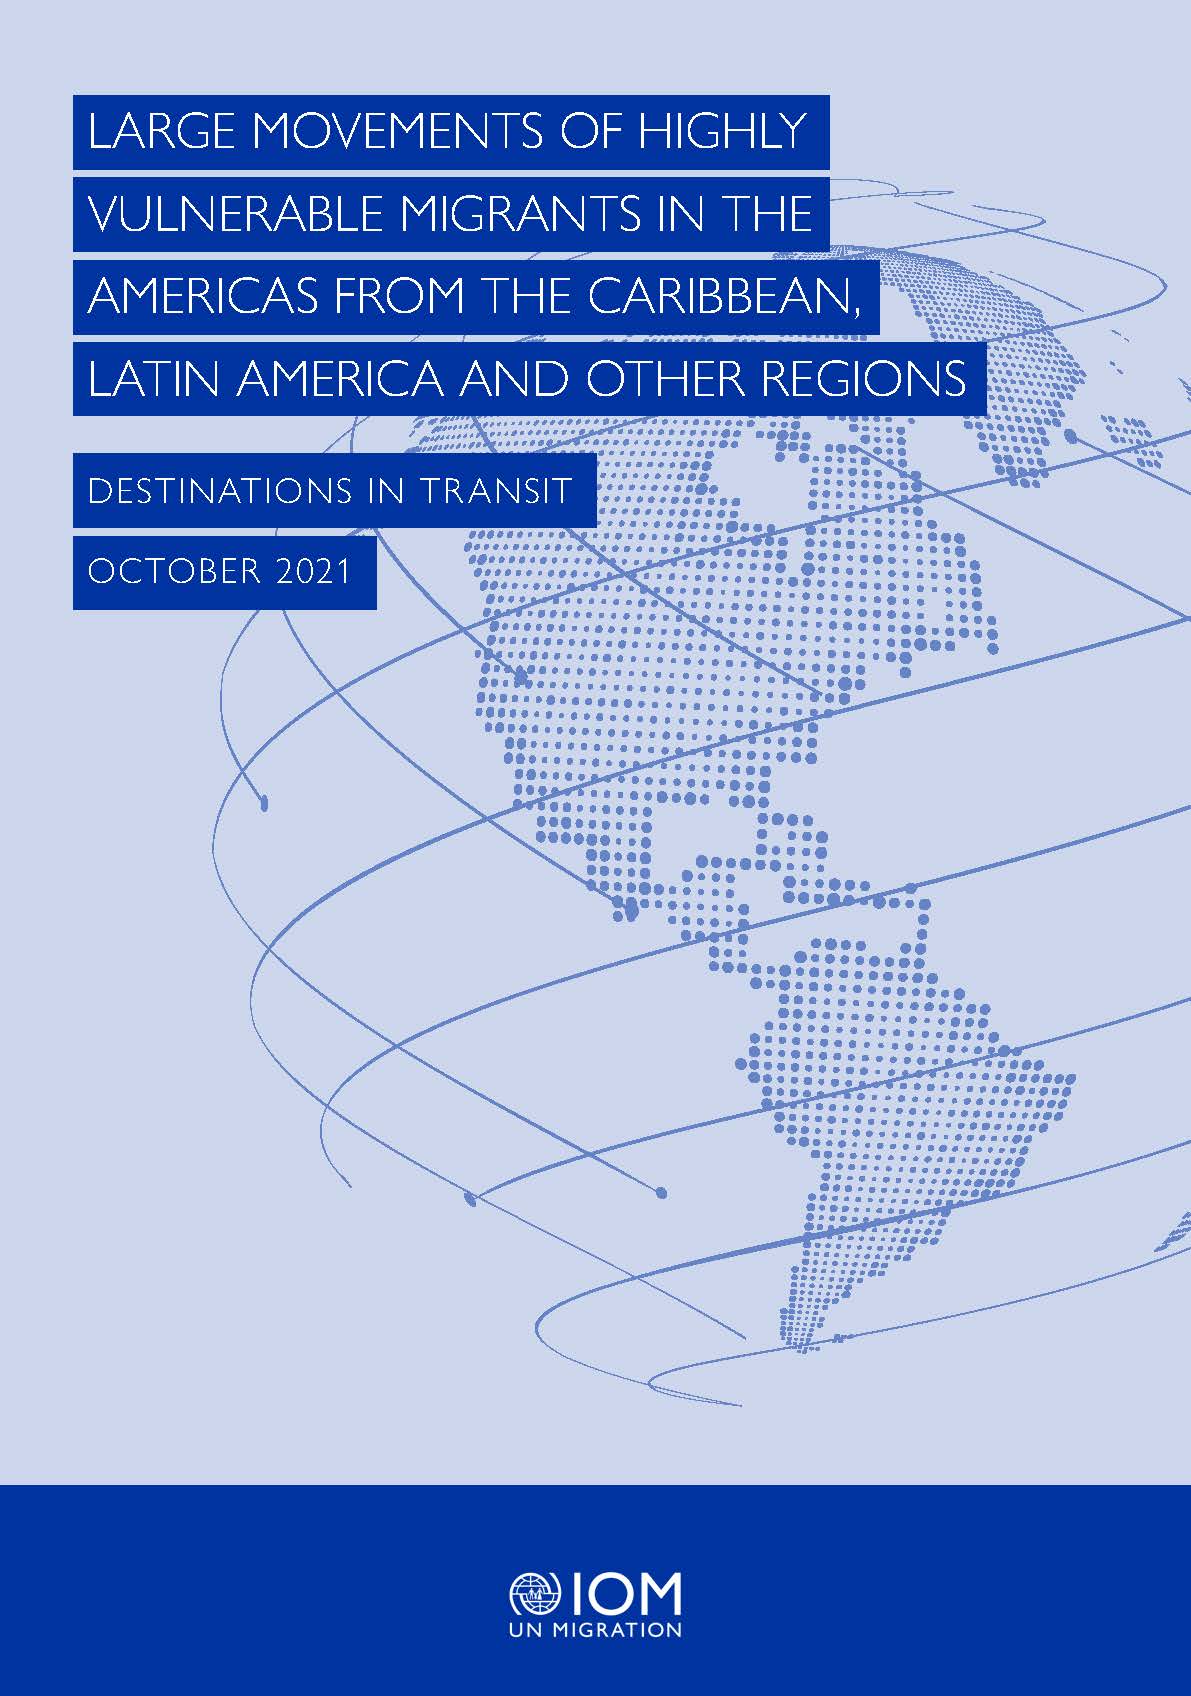 Large Movements of Highly Vulnerable Migrants in the Americas from the Caribbean, Latin America and other Regions